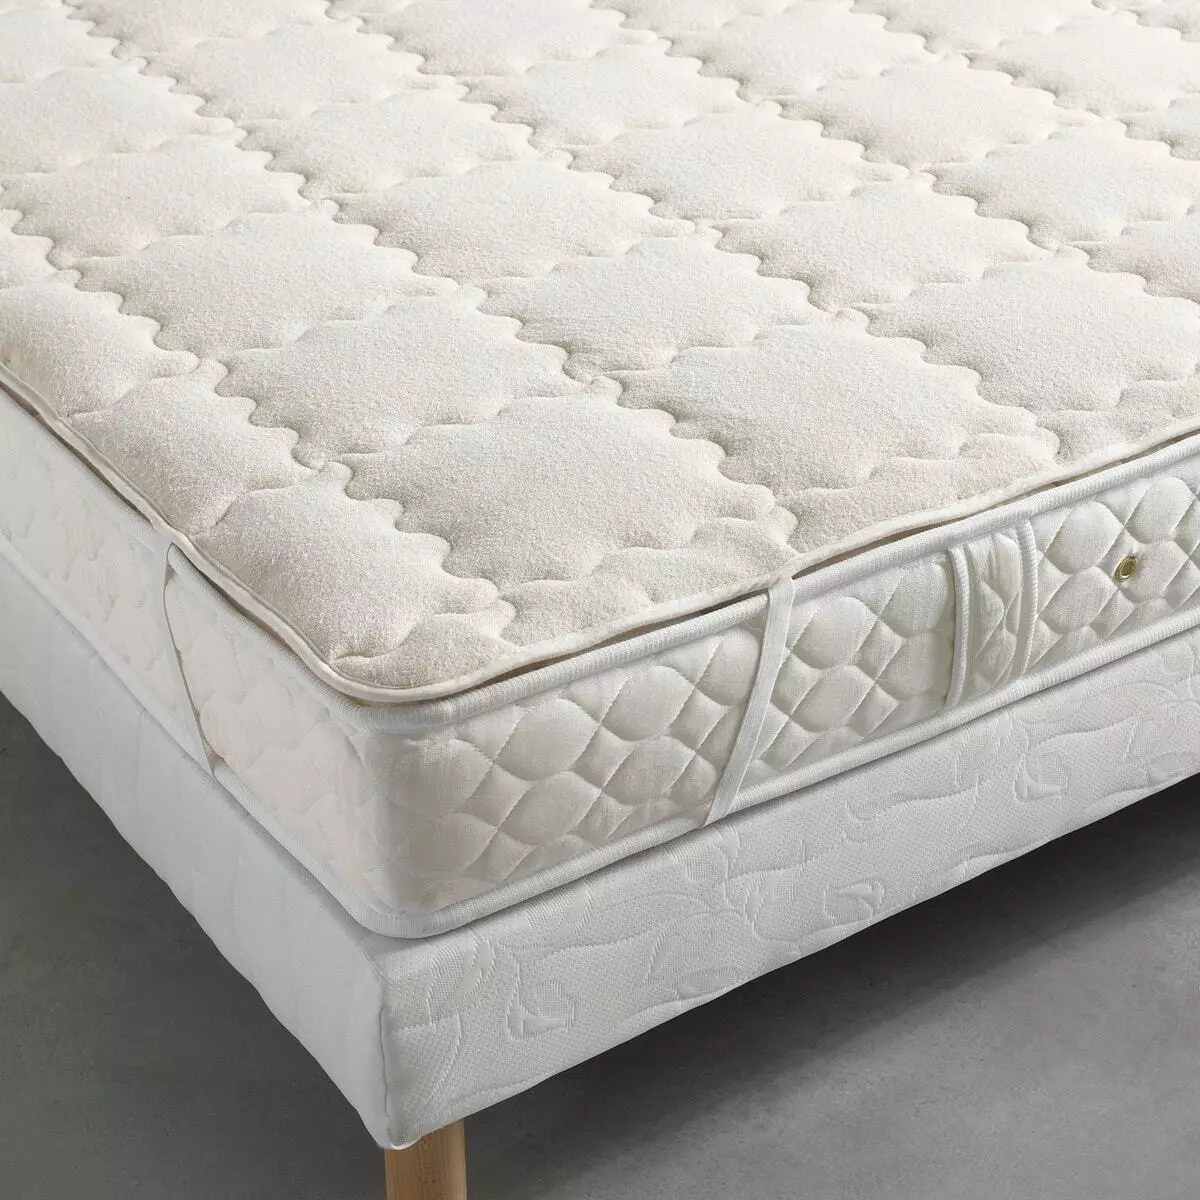 Orthopedic Mattrices: Mattress Mattress 160x200 and 140x200, 180x200 and other mattress covers. Rating of the best mattress covers. How to choose a hard mattress? 21580_5